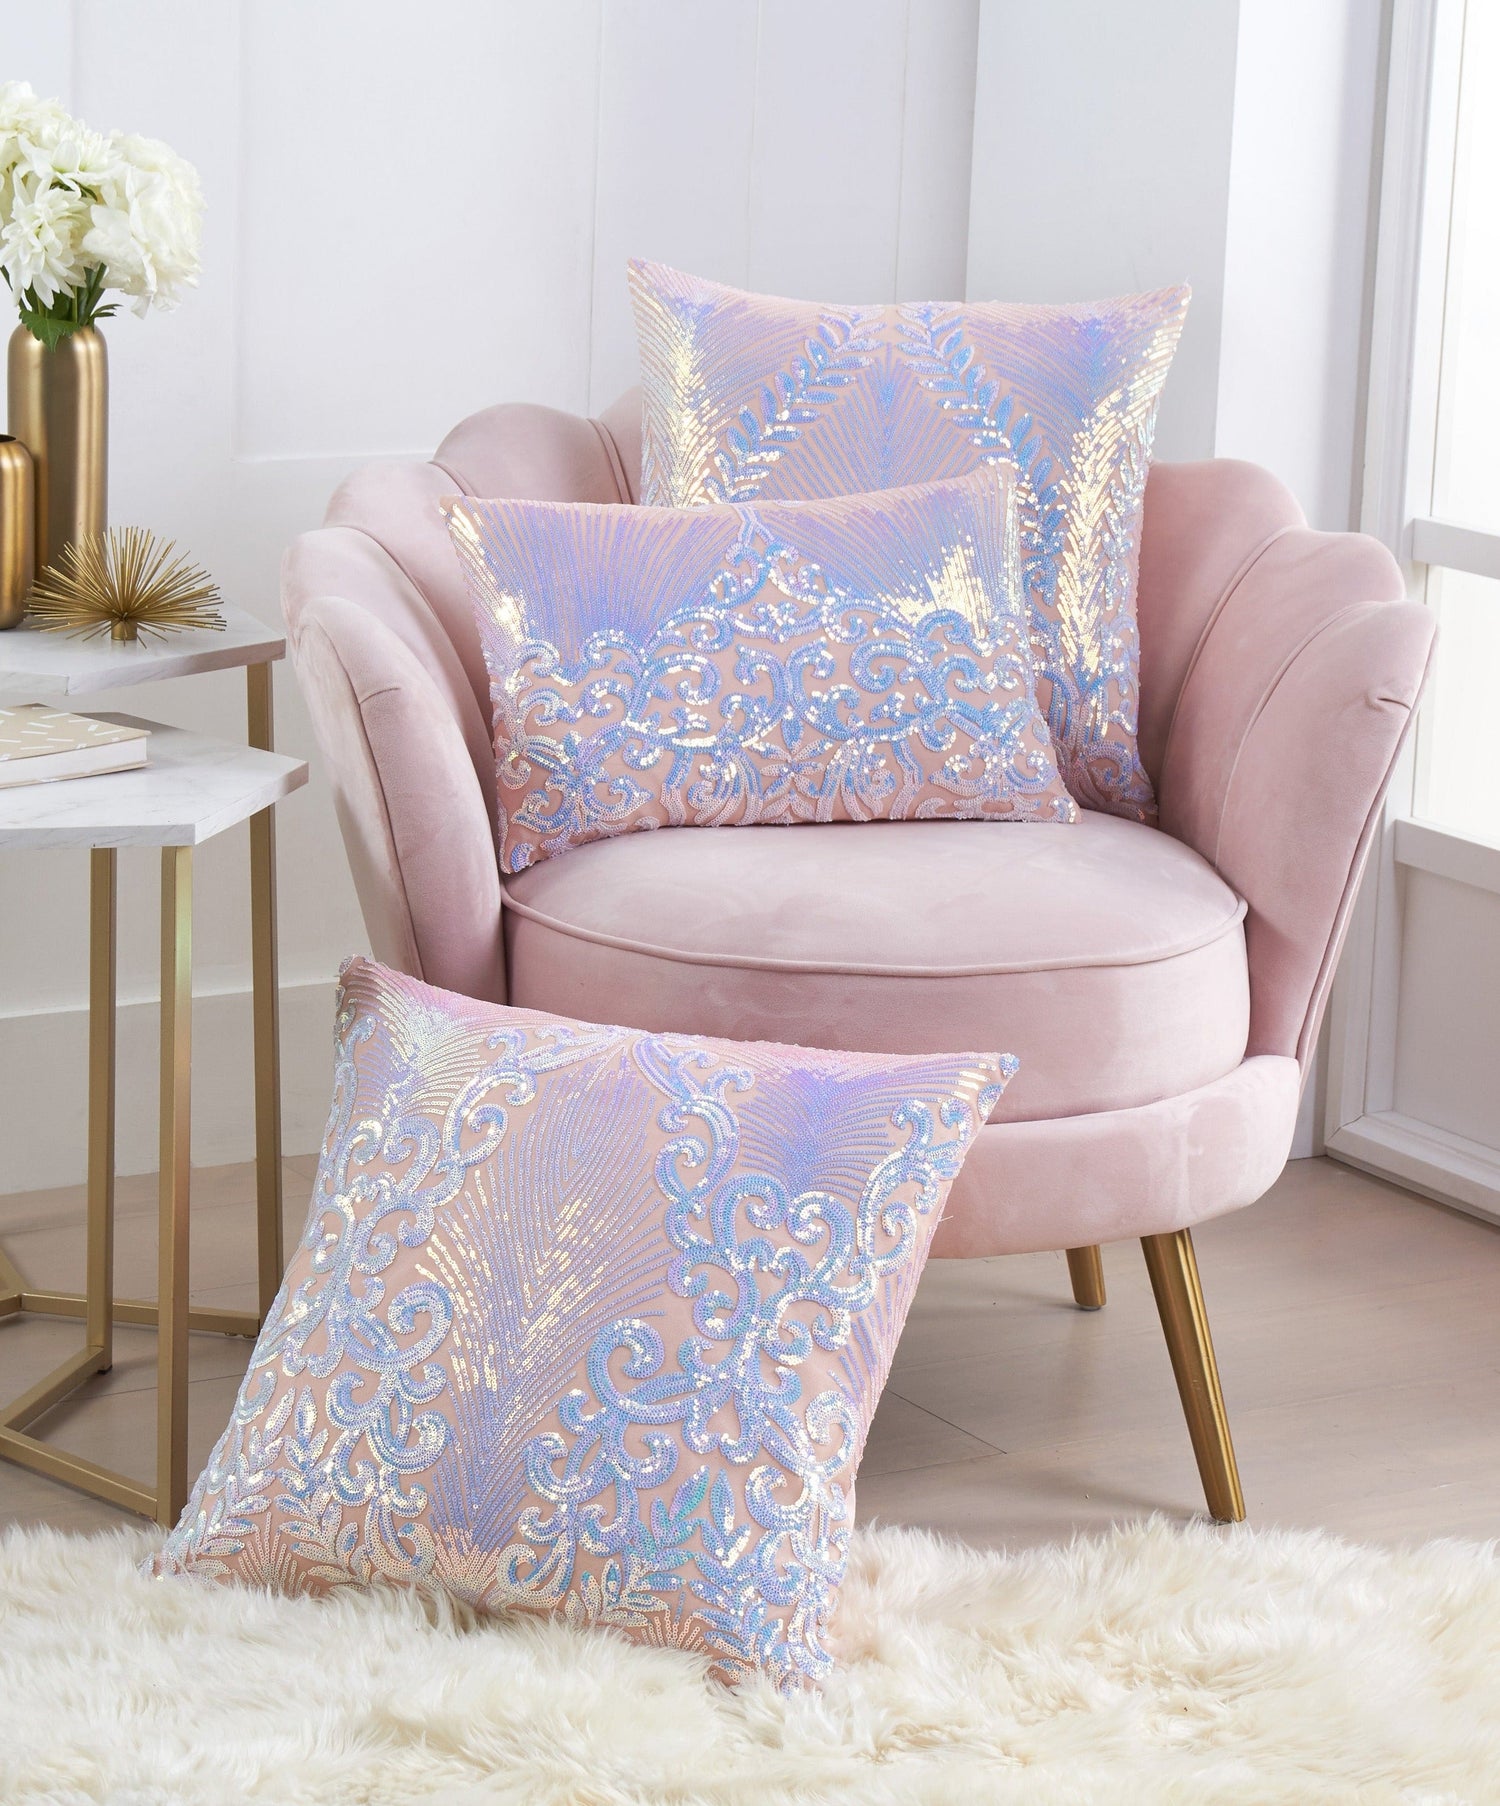 PacoRogieneHOME Angel Collection Sequin Decorative Throw Pillow Cover. Soft Pink Iridescent Sequin